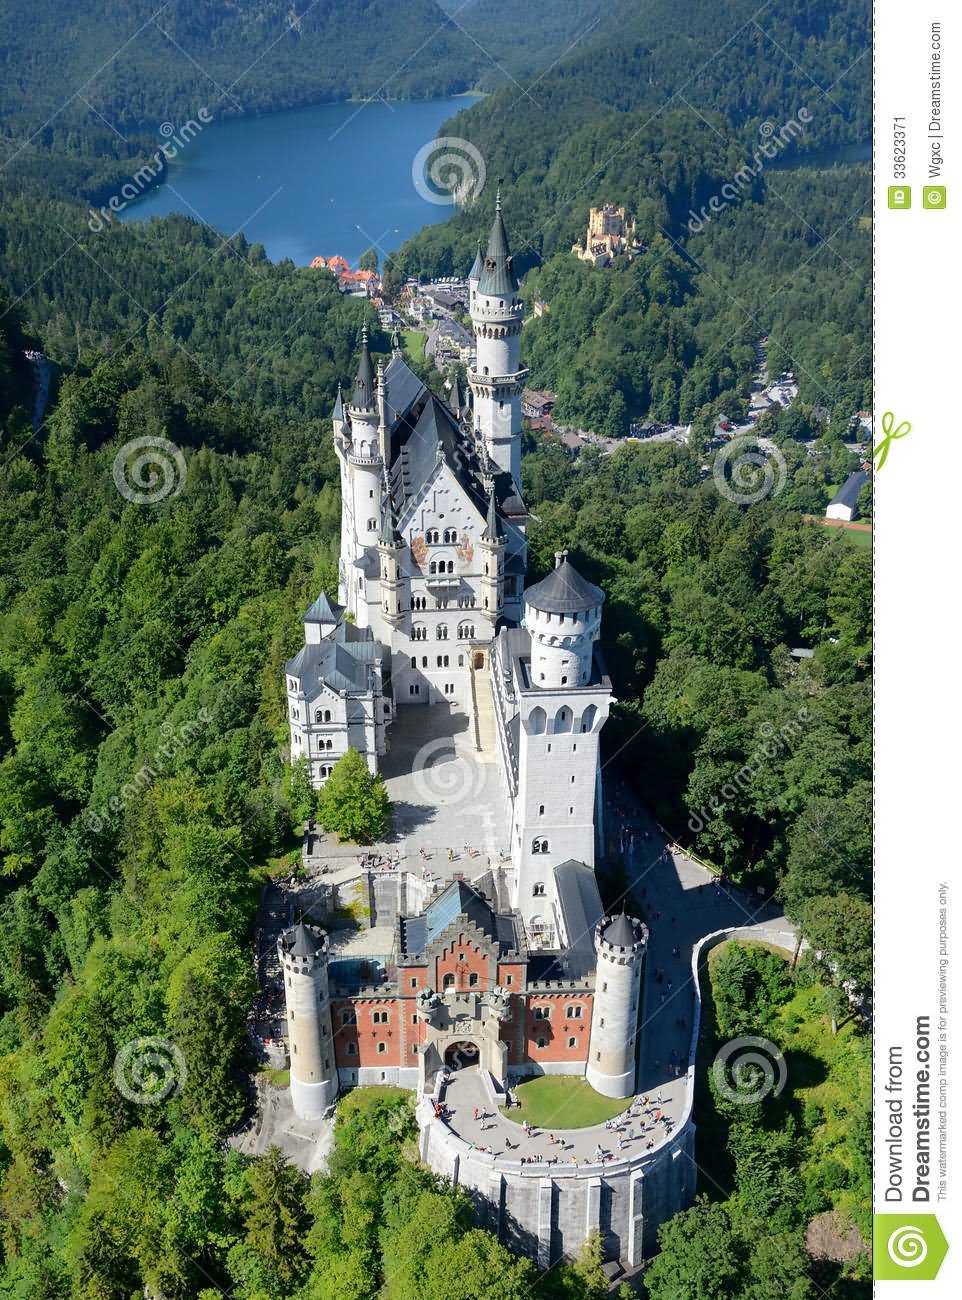 Front Aerial View Image Of The Neuschwanstein Castle